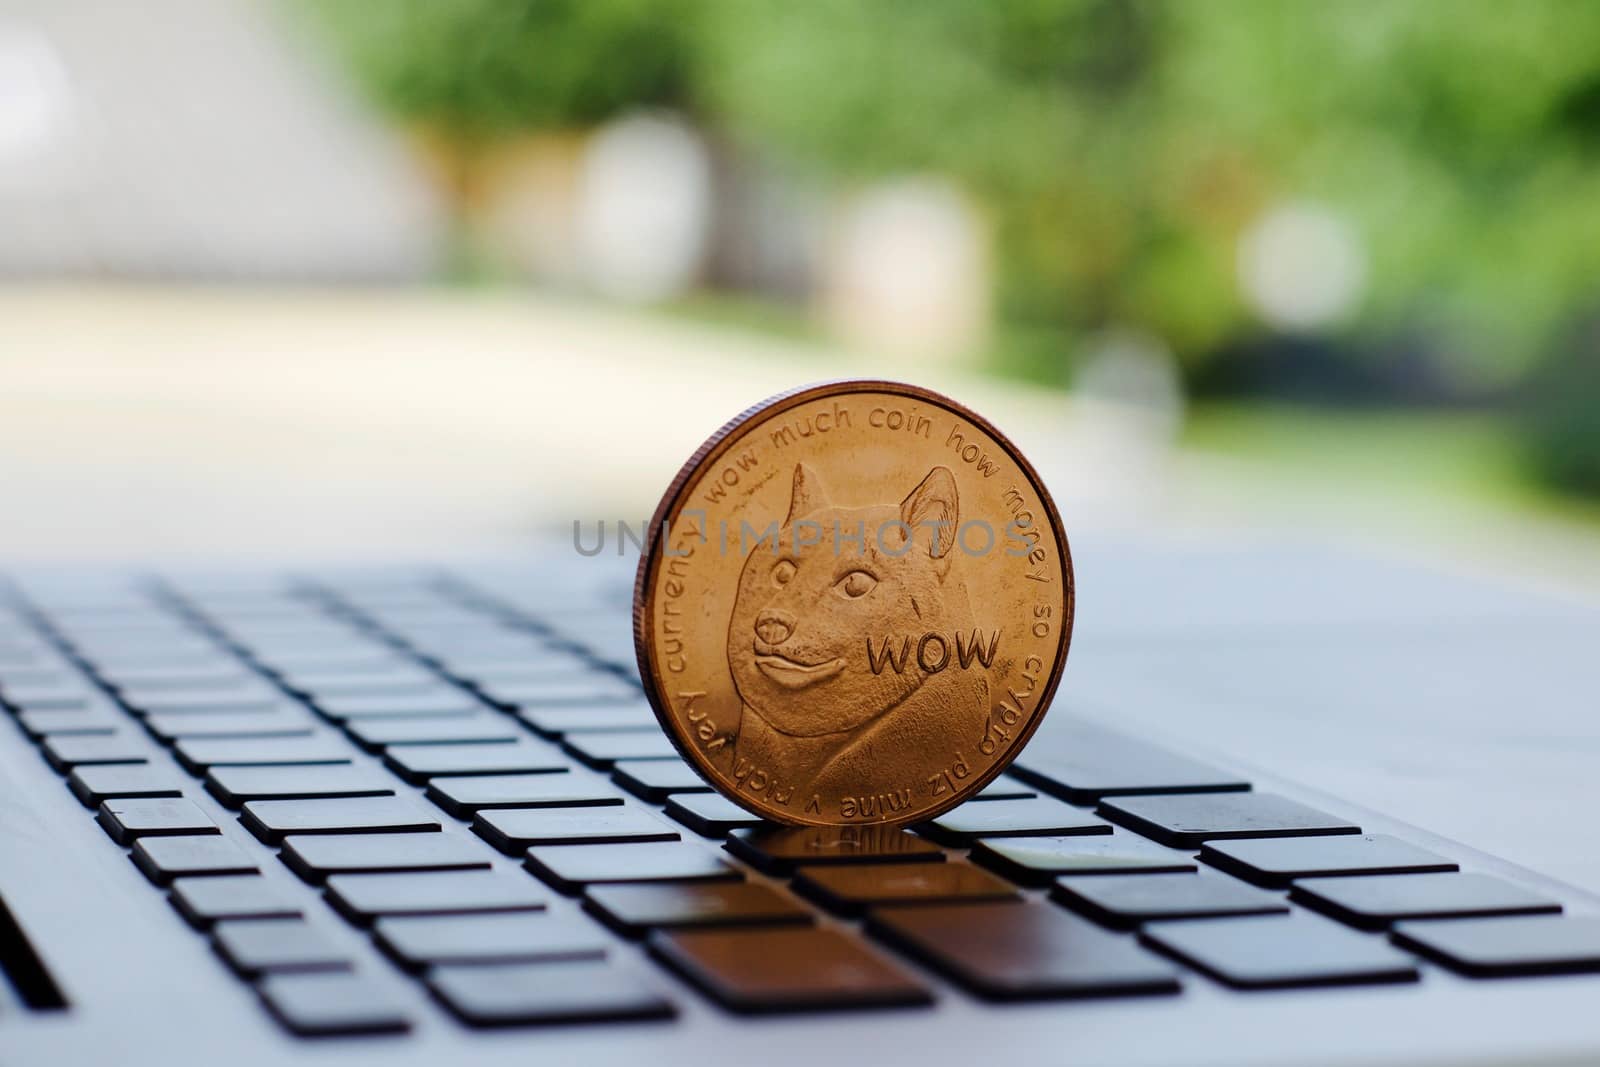 Digital currency physical brass dogecoin coin on the black computer keyboard near the window.